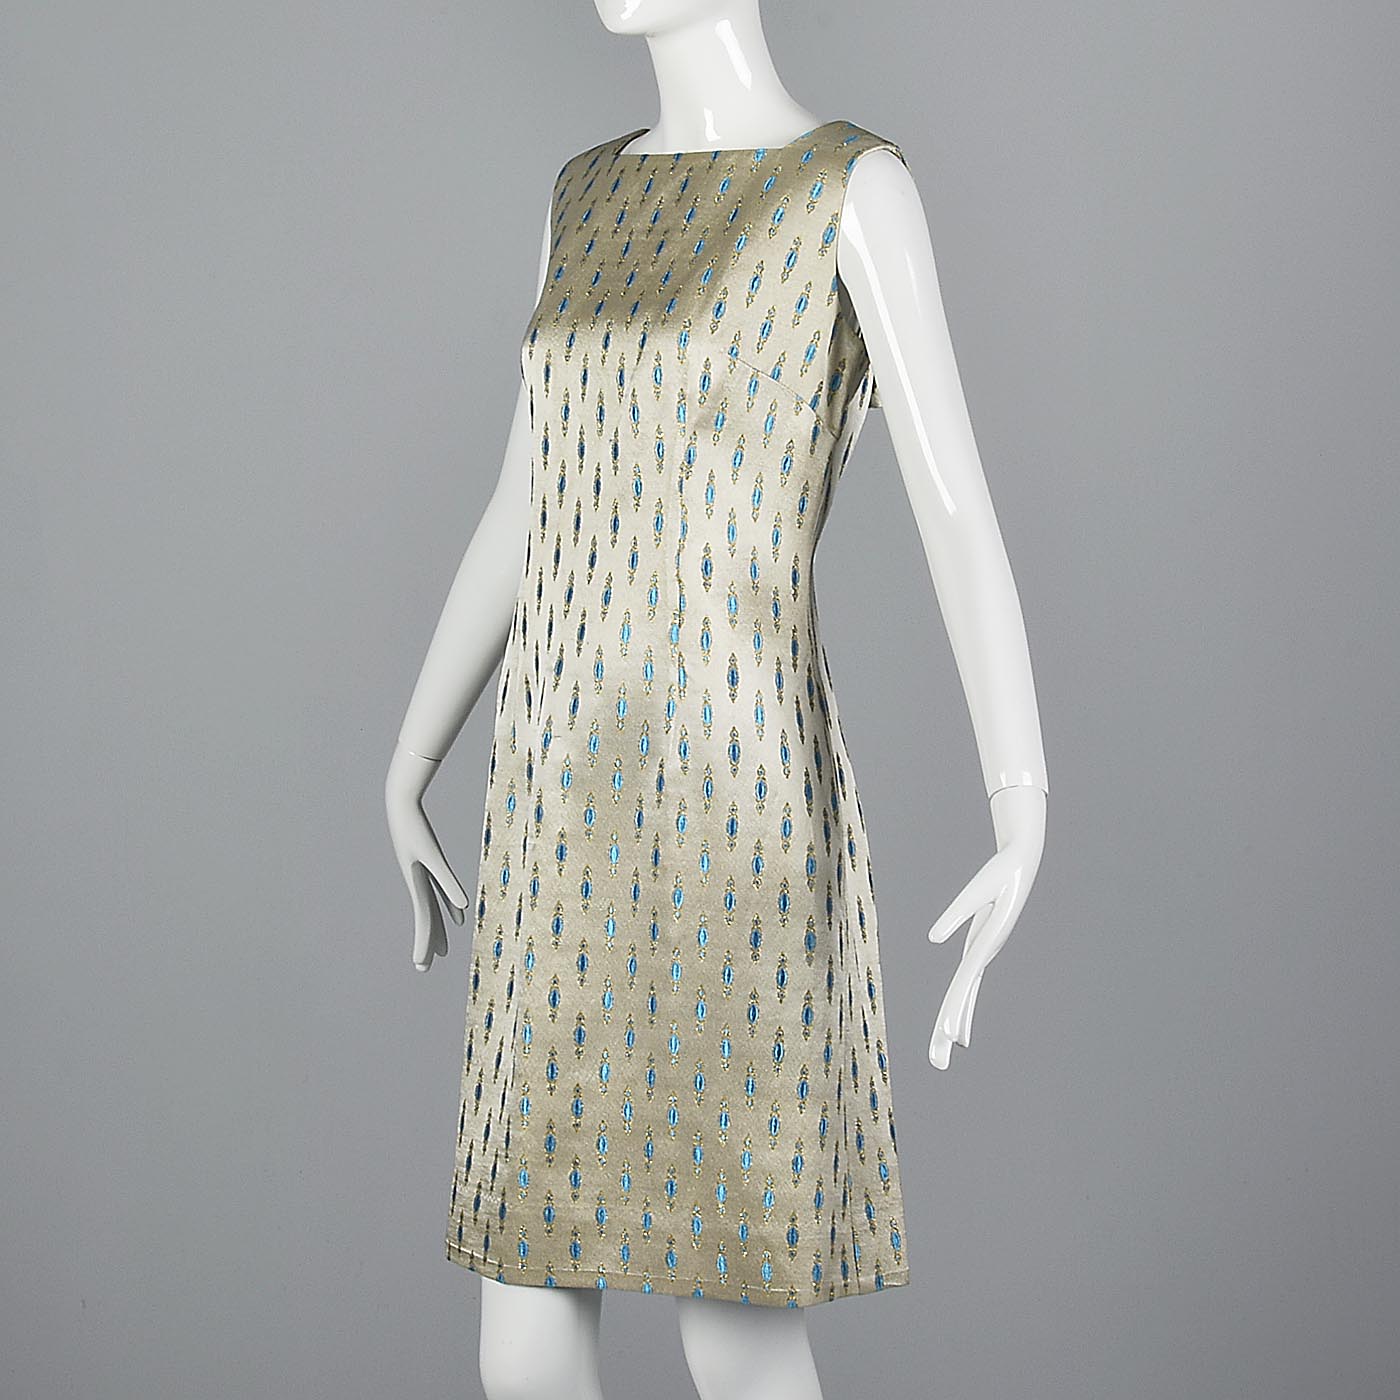 1960s Elegant Silver Shift Dress with Low Back